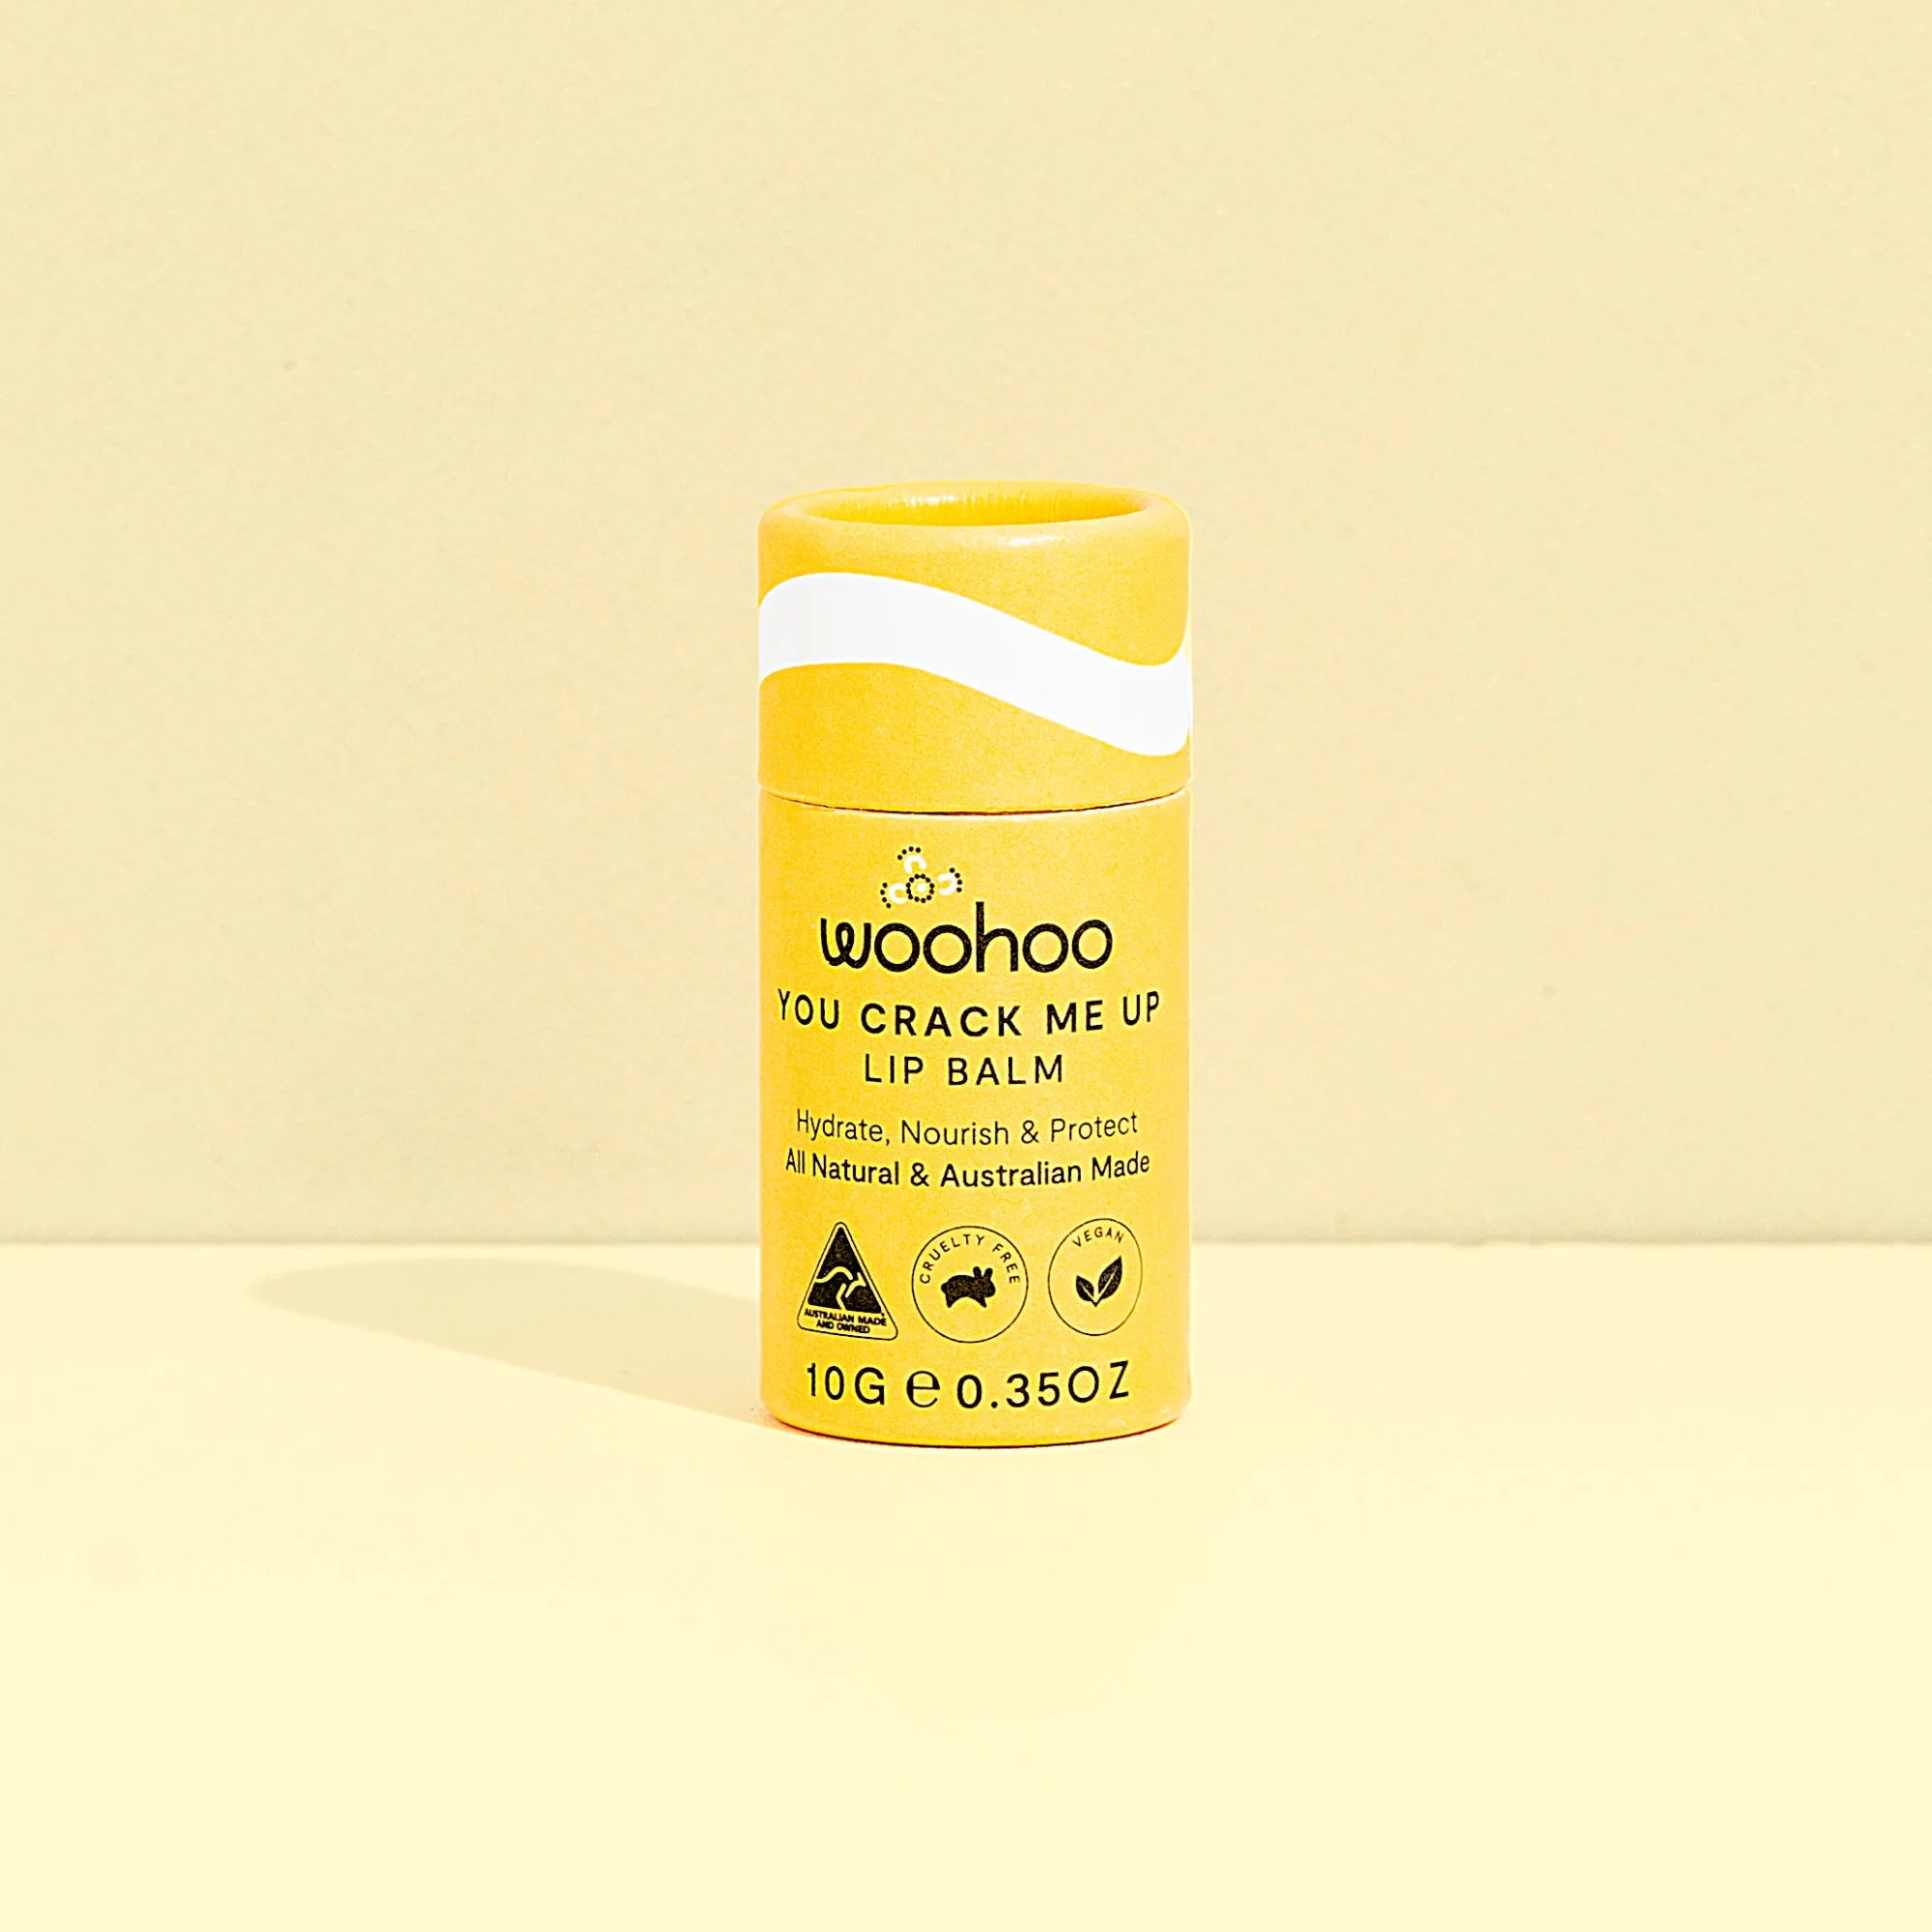 Image of the Woohoo You Crack Me Up! Lip Balm on a light yellow background 